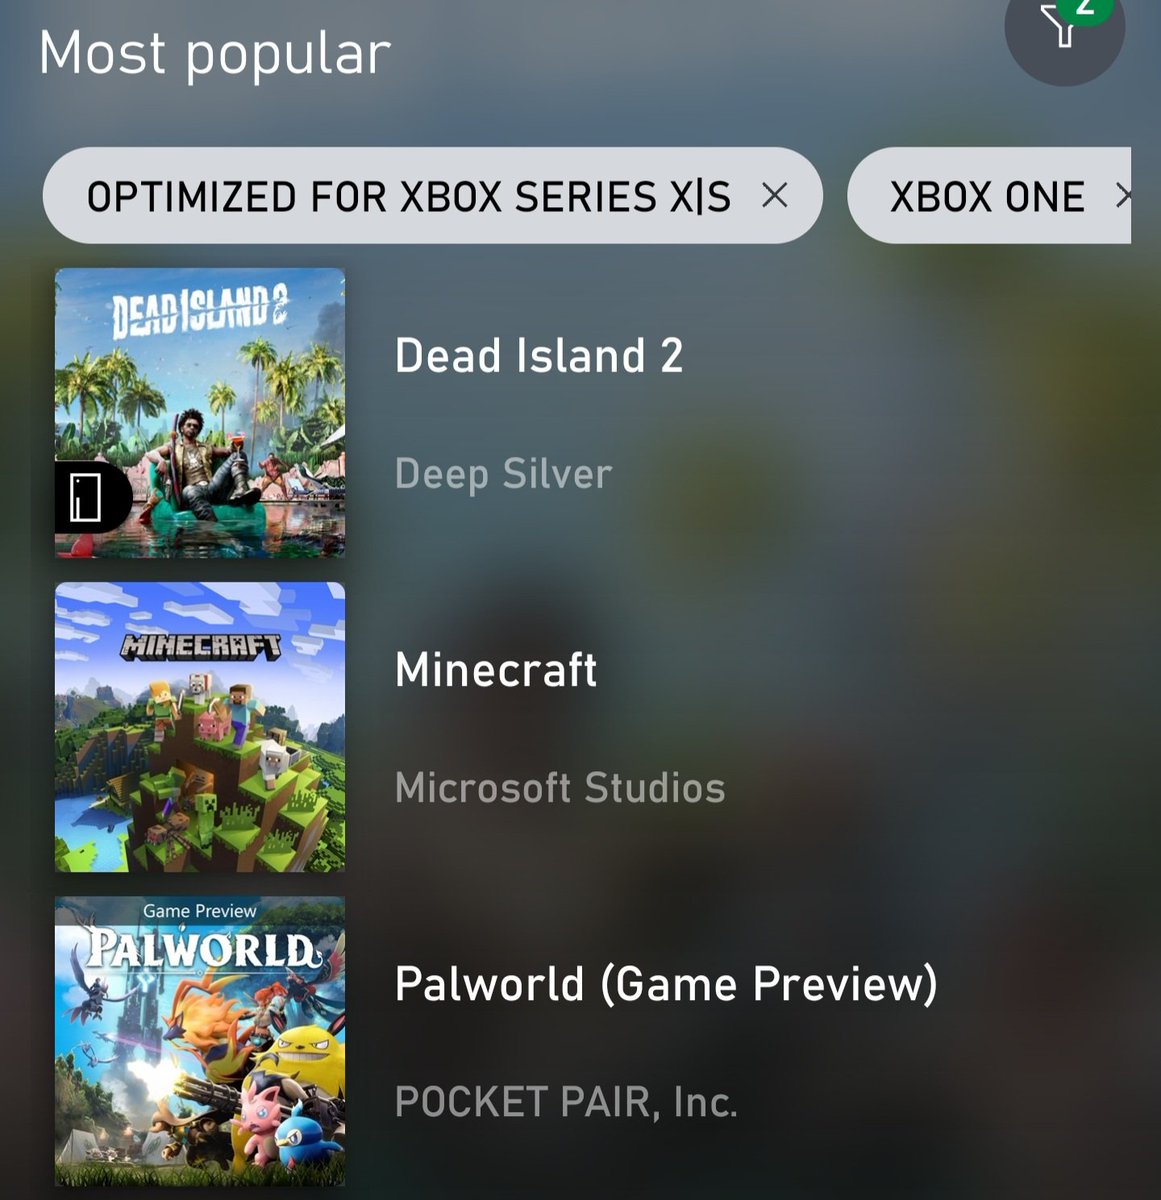 Dead Island 2 is performing tremendously strong on Game Pass It's currently the #1 Most Popular Game in the US above both Minecraft and Palworld